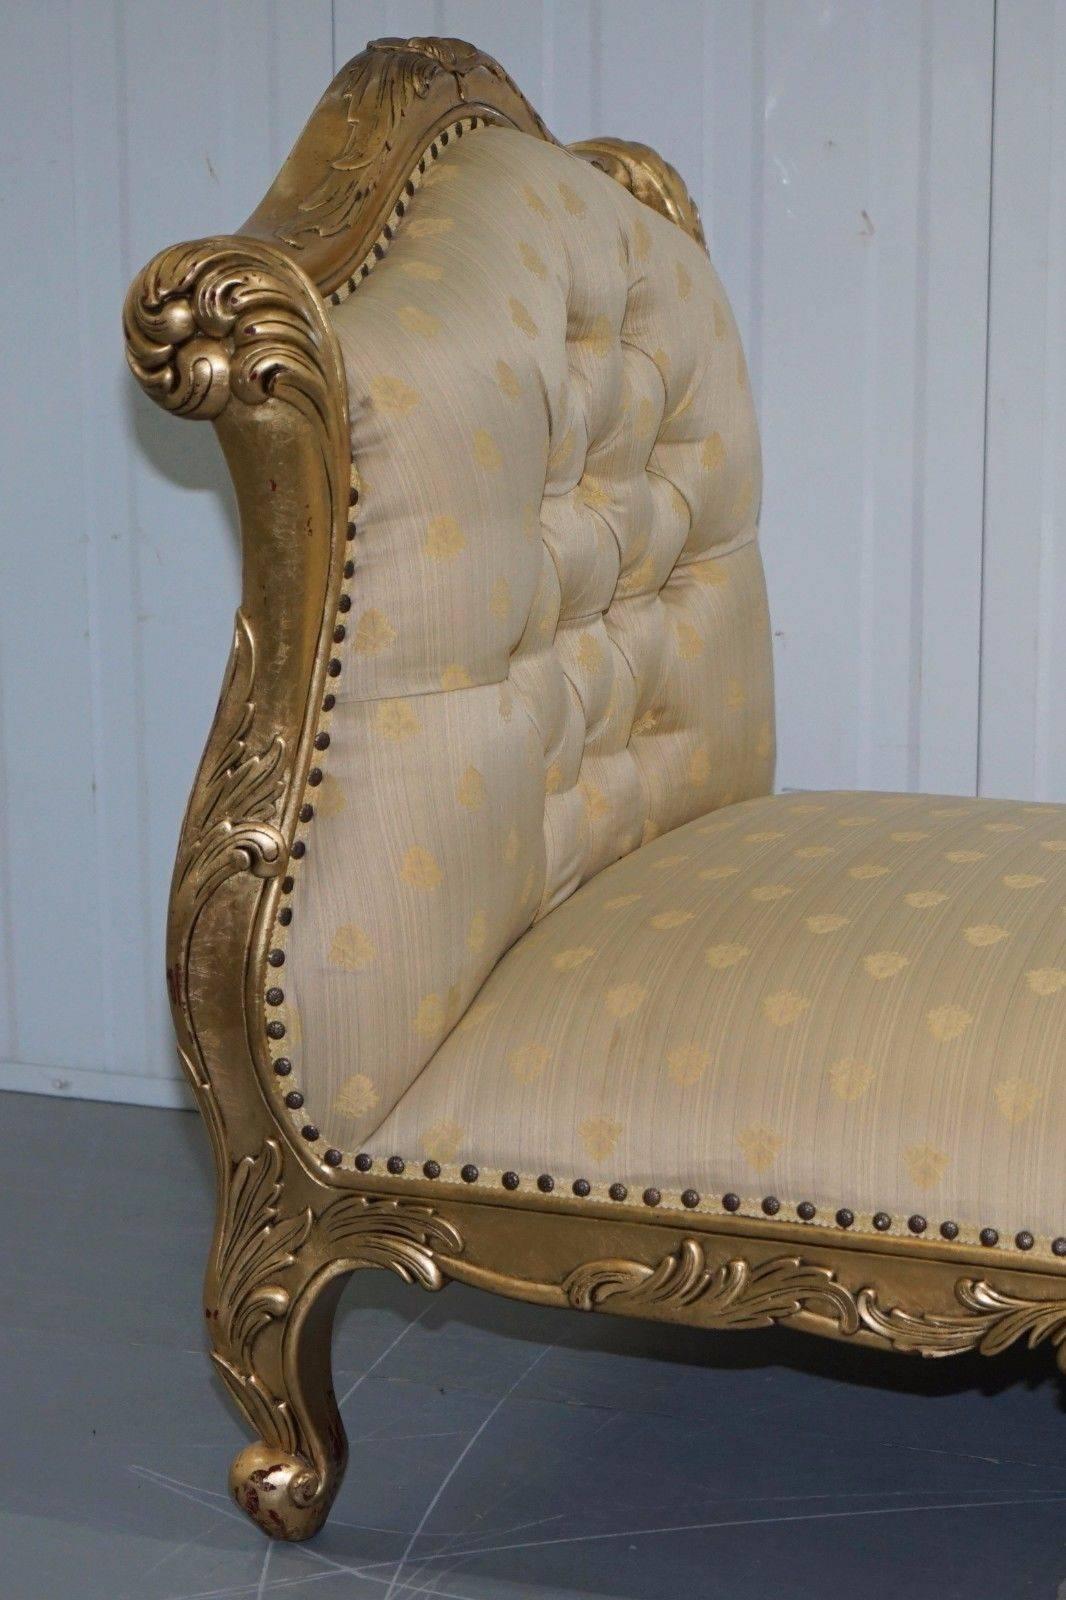 Hand-Crafted Large 3-4 Seat Victorian Gold Leaf Painted French Daybed or Chaise Longue